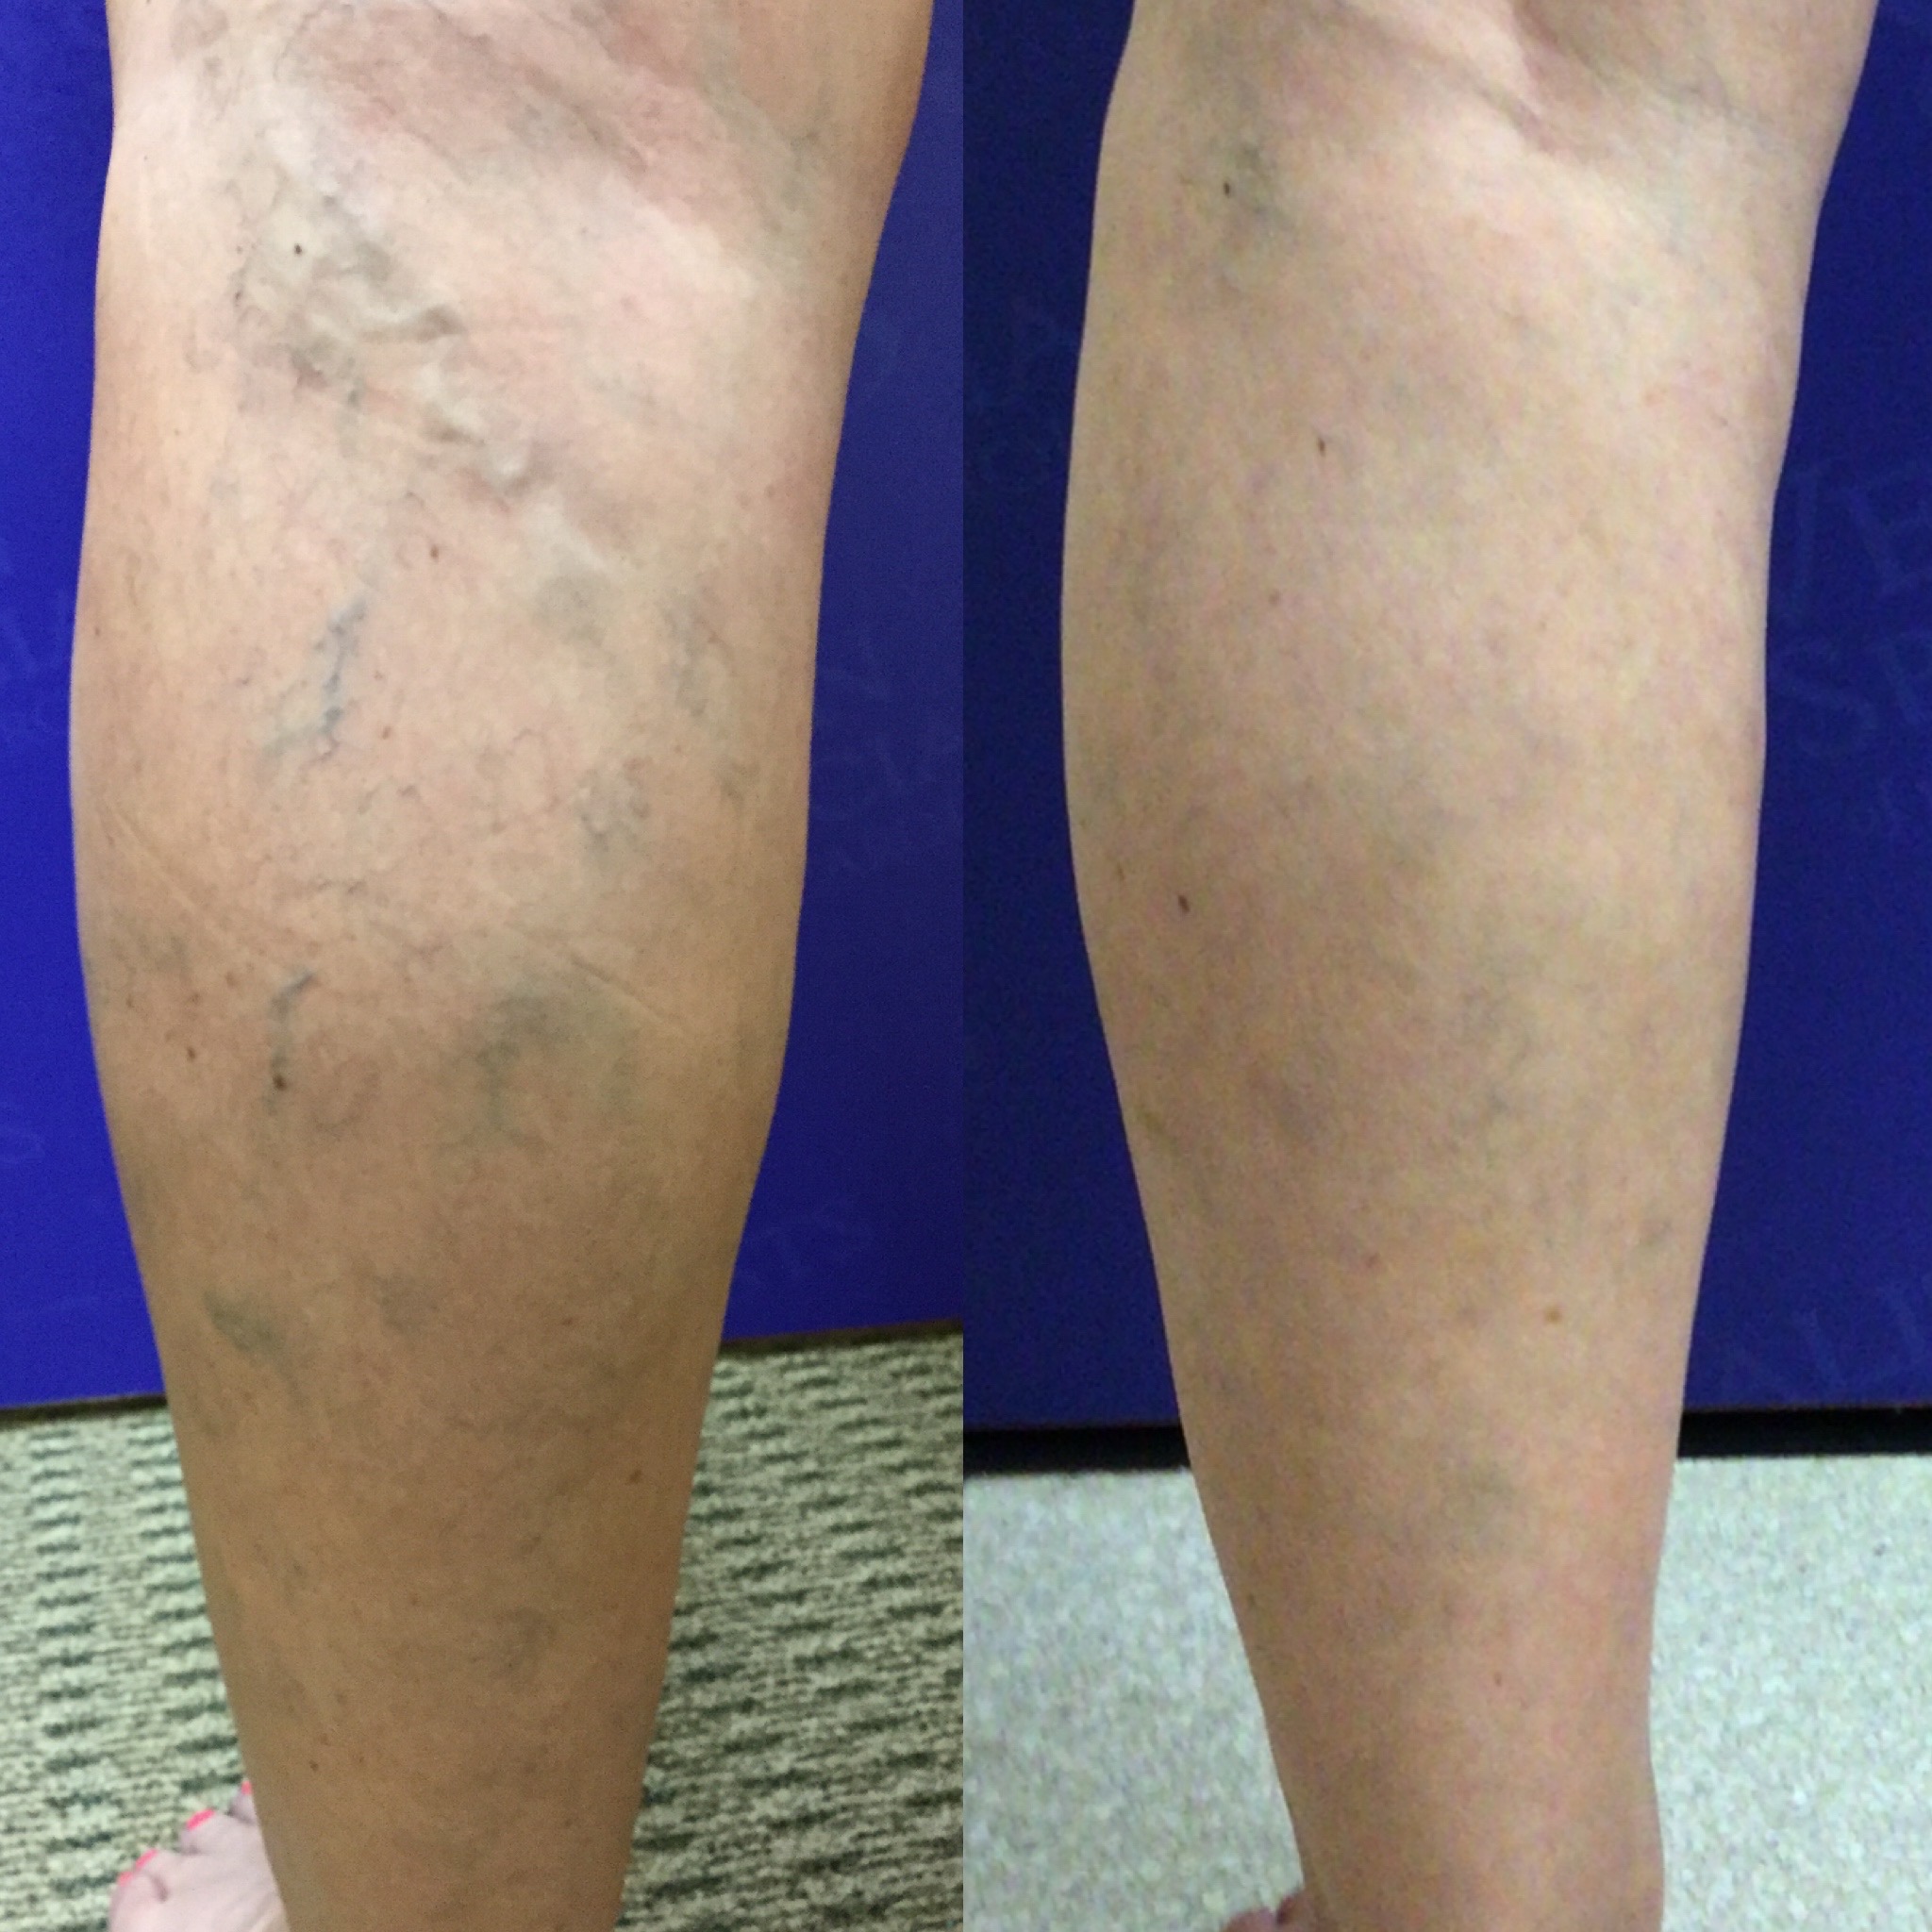 Sclerotherapy Is A Less-Invasive Way To Get Rid of Spider Veins